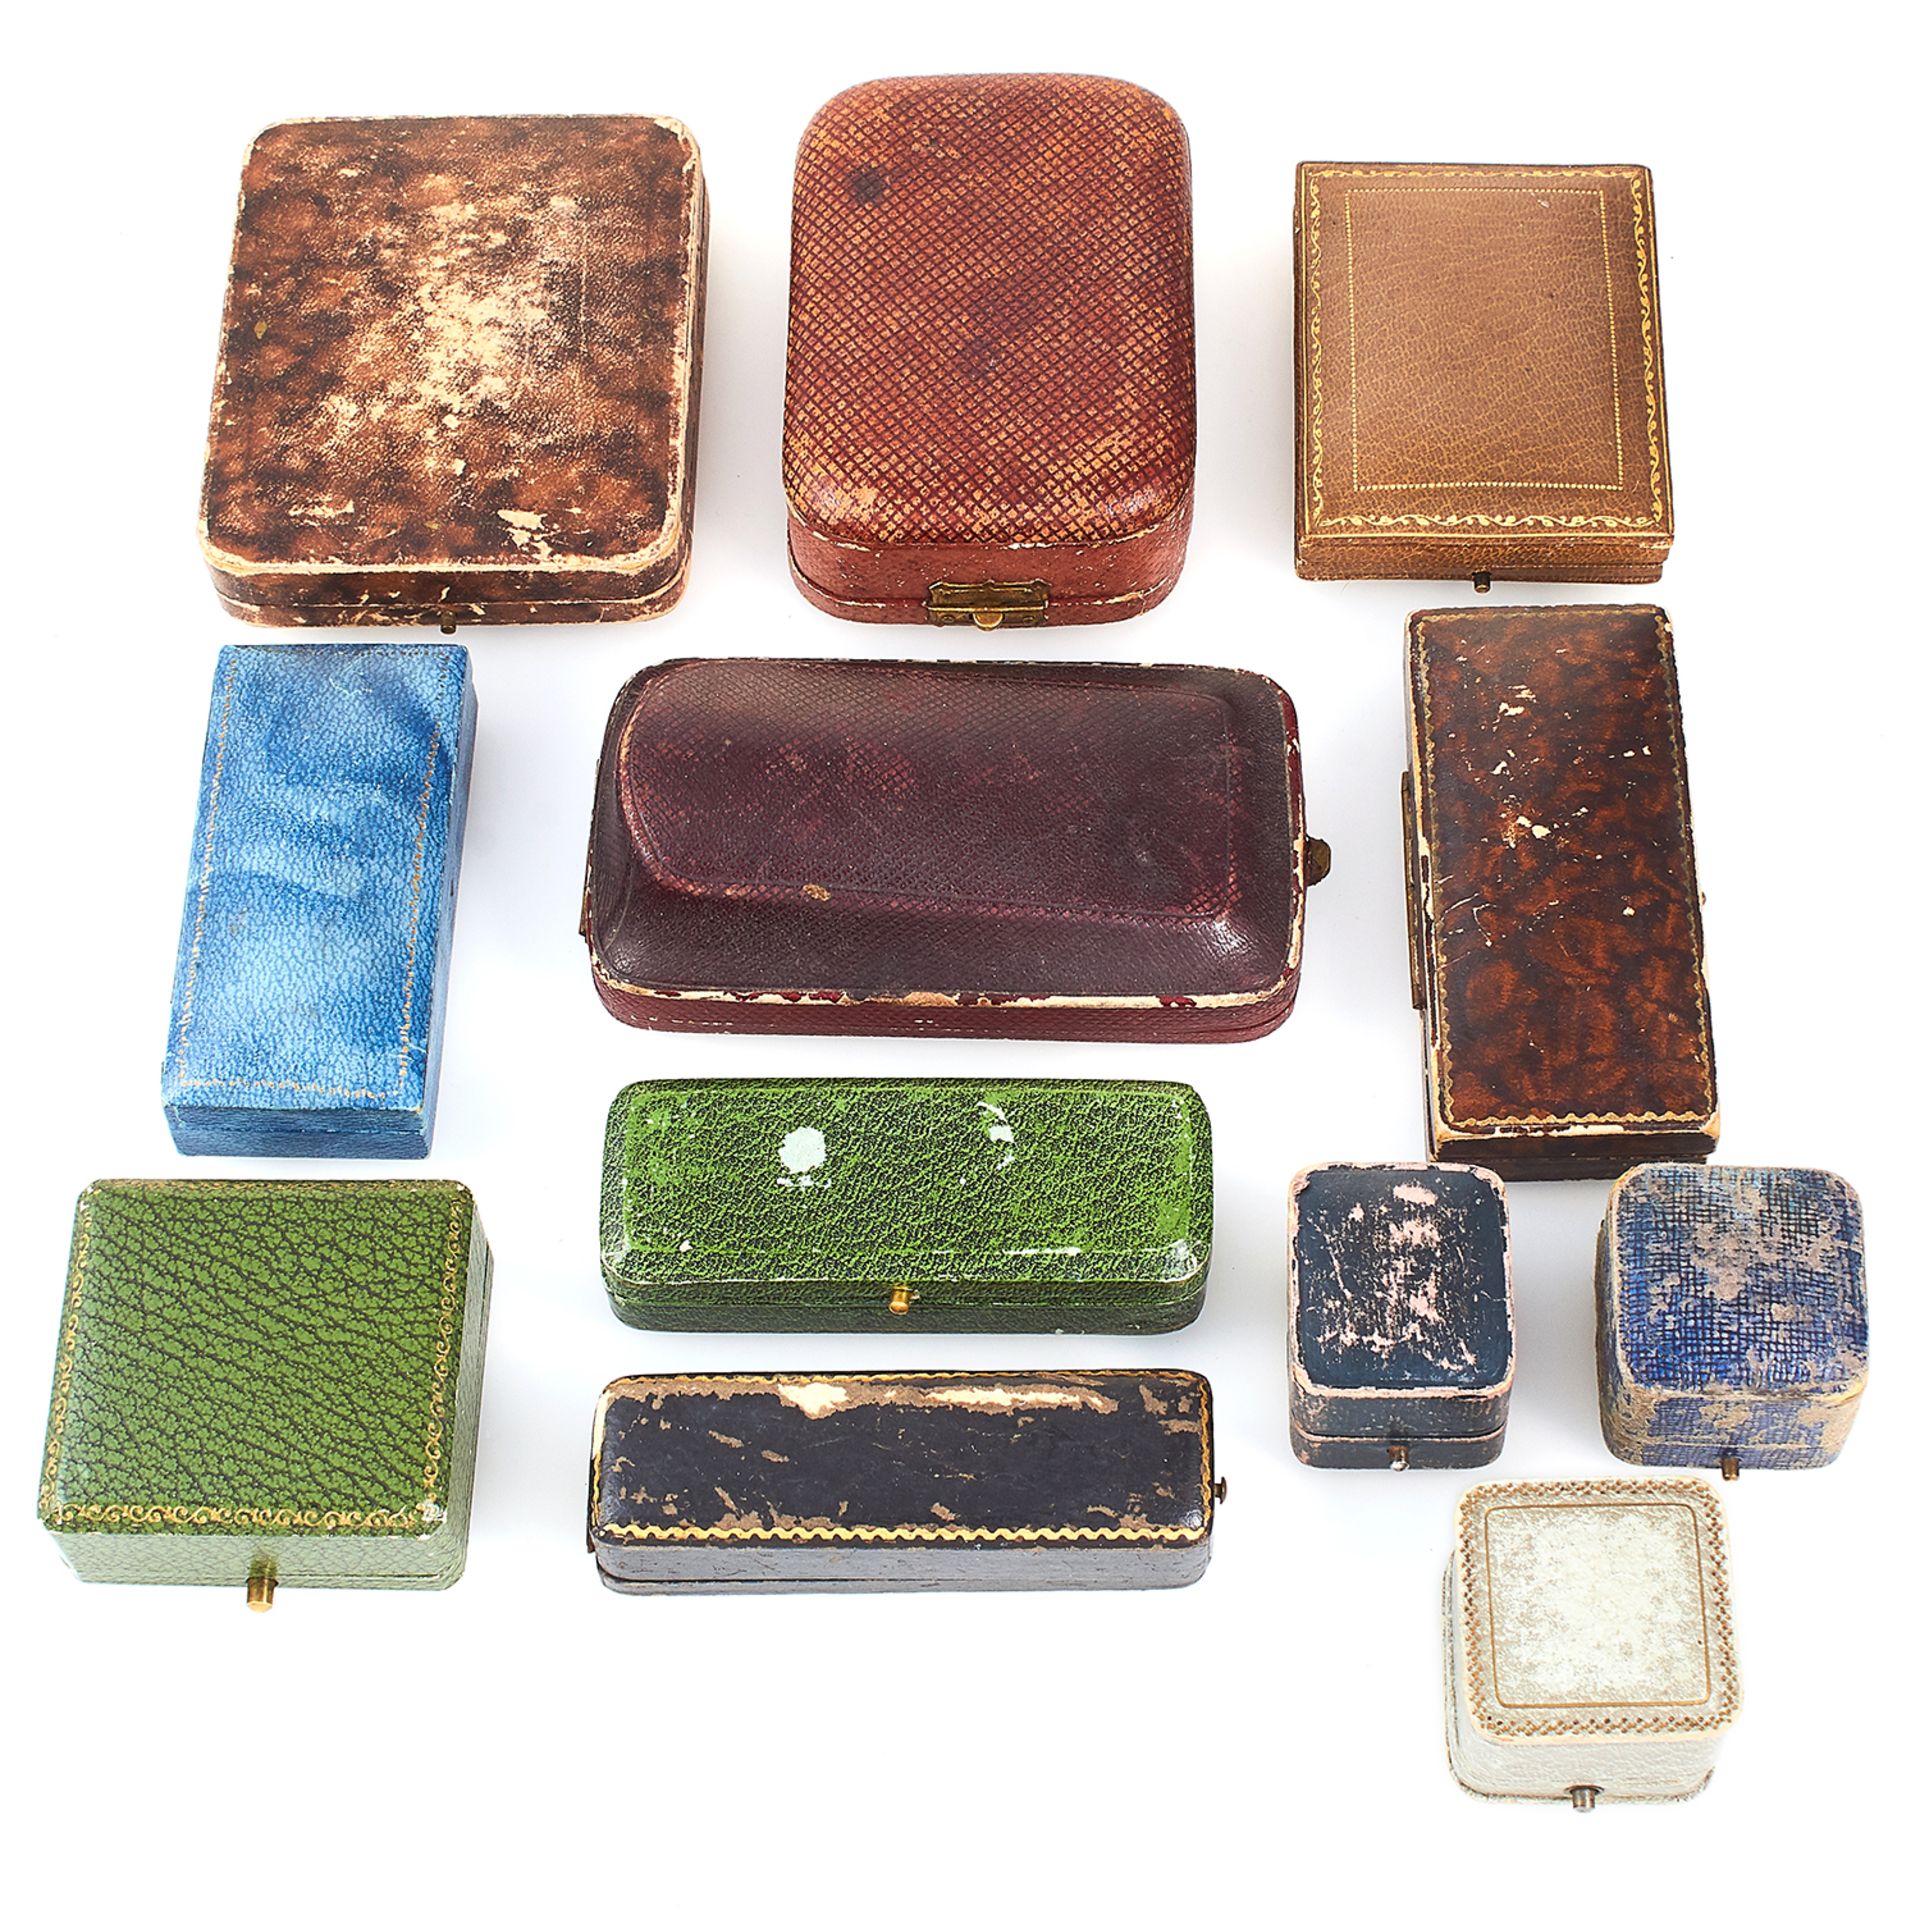 A COLLECTION OF TWELVE VARIOUS ANTIQUE JEWELLERY BOXES